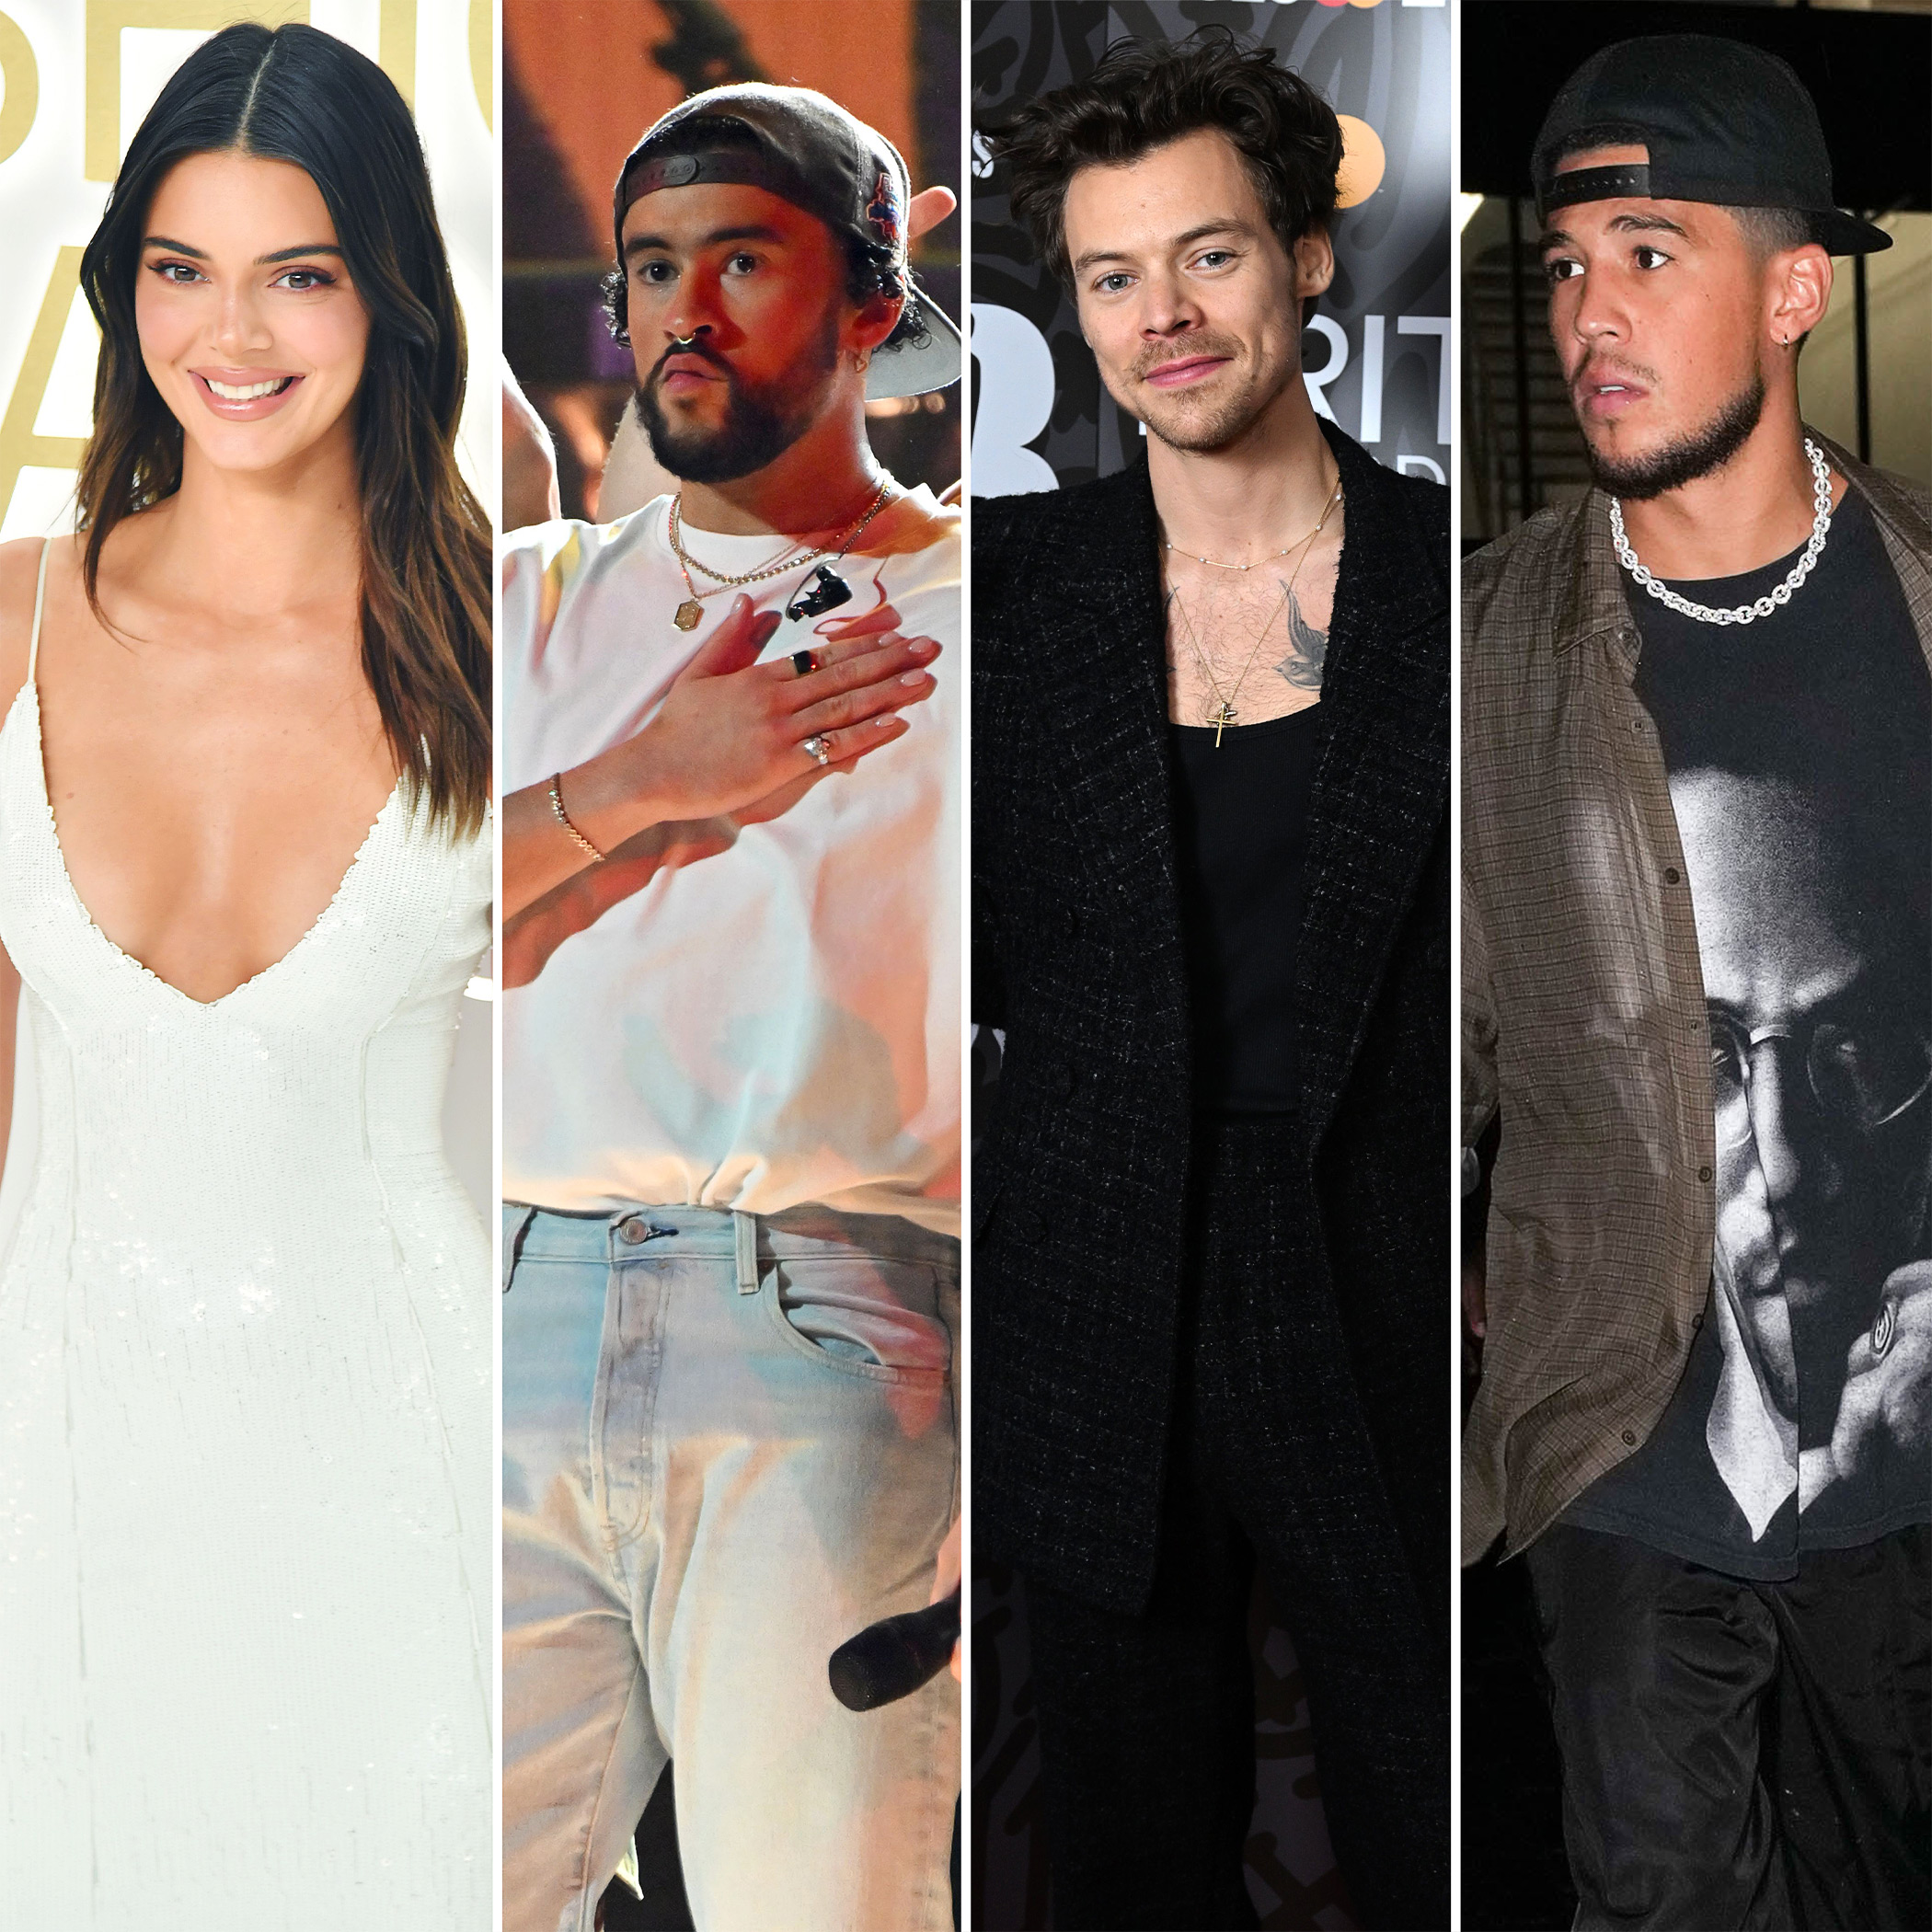 Kendall Jenner's dating history